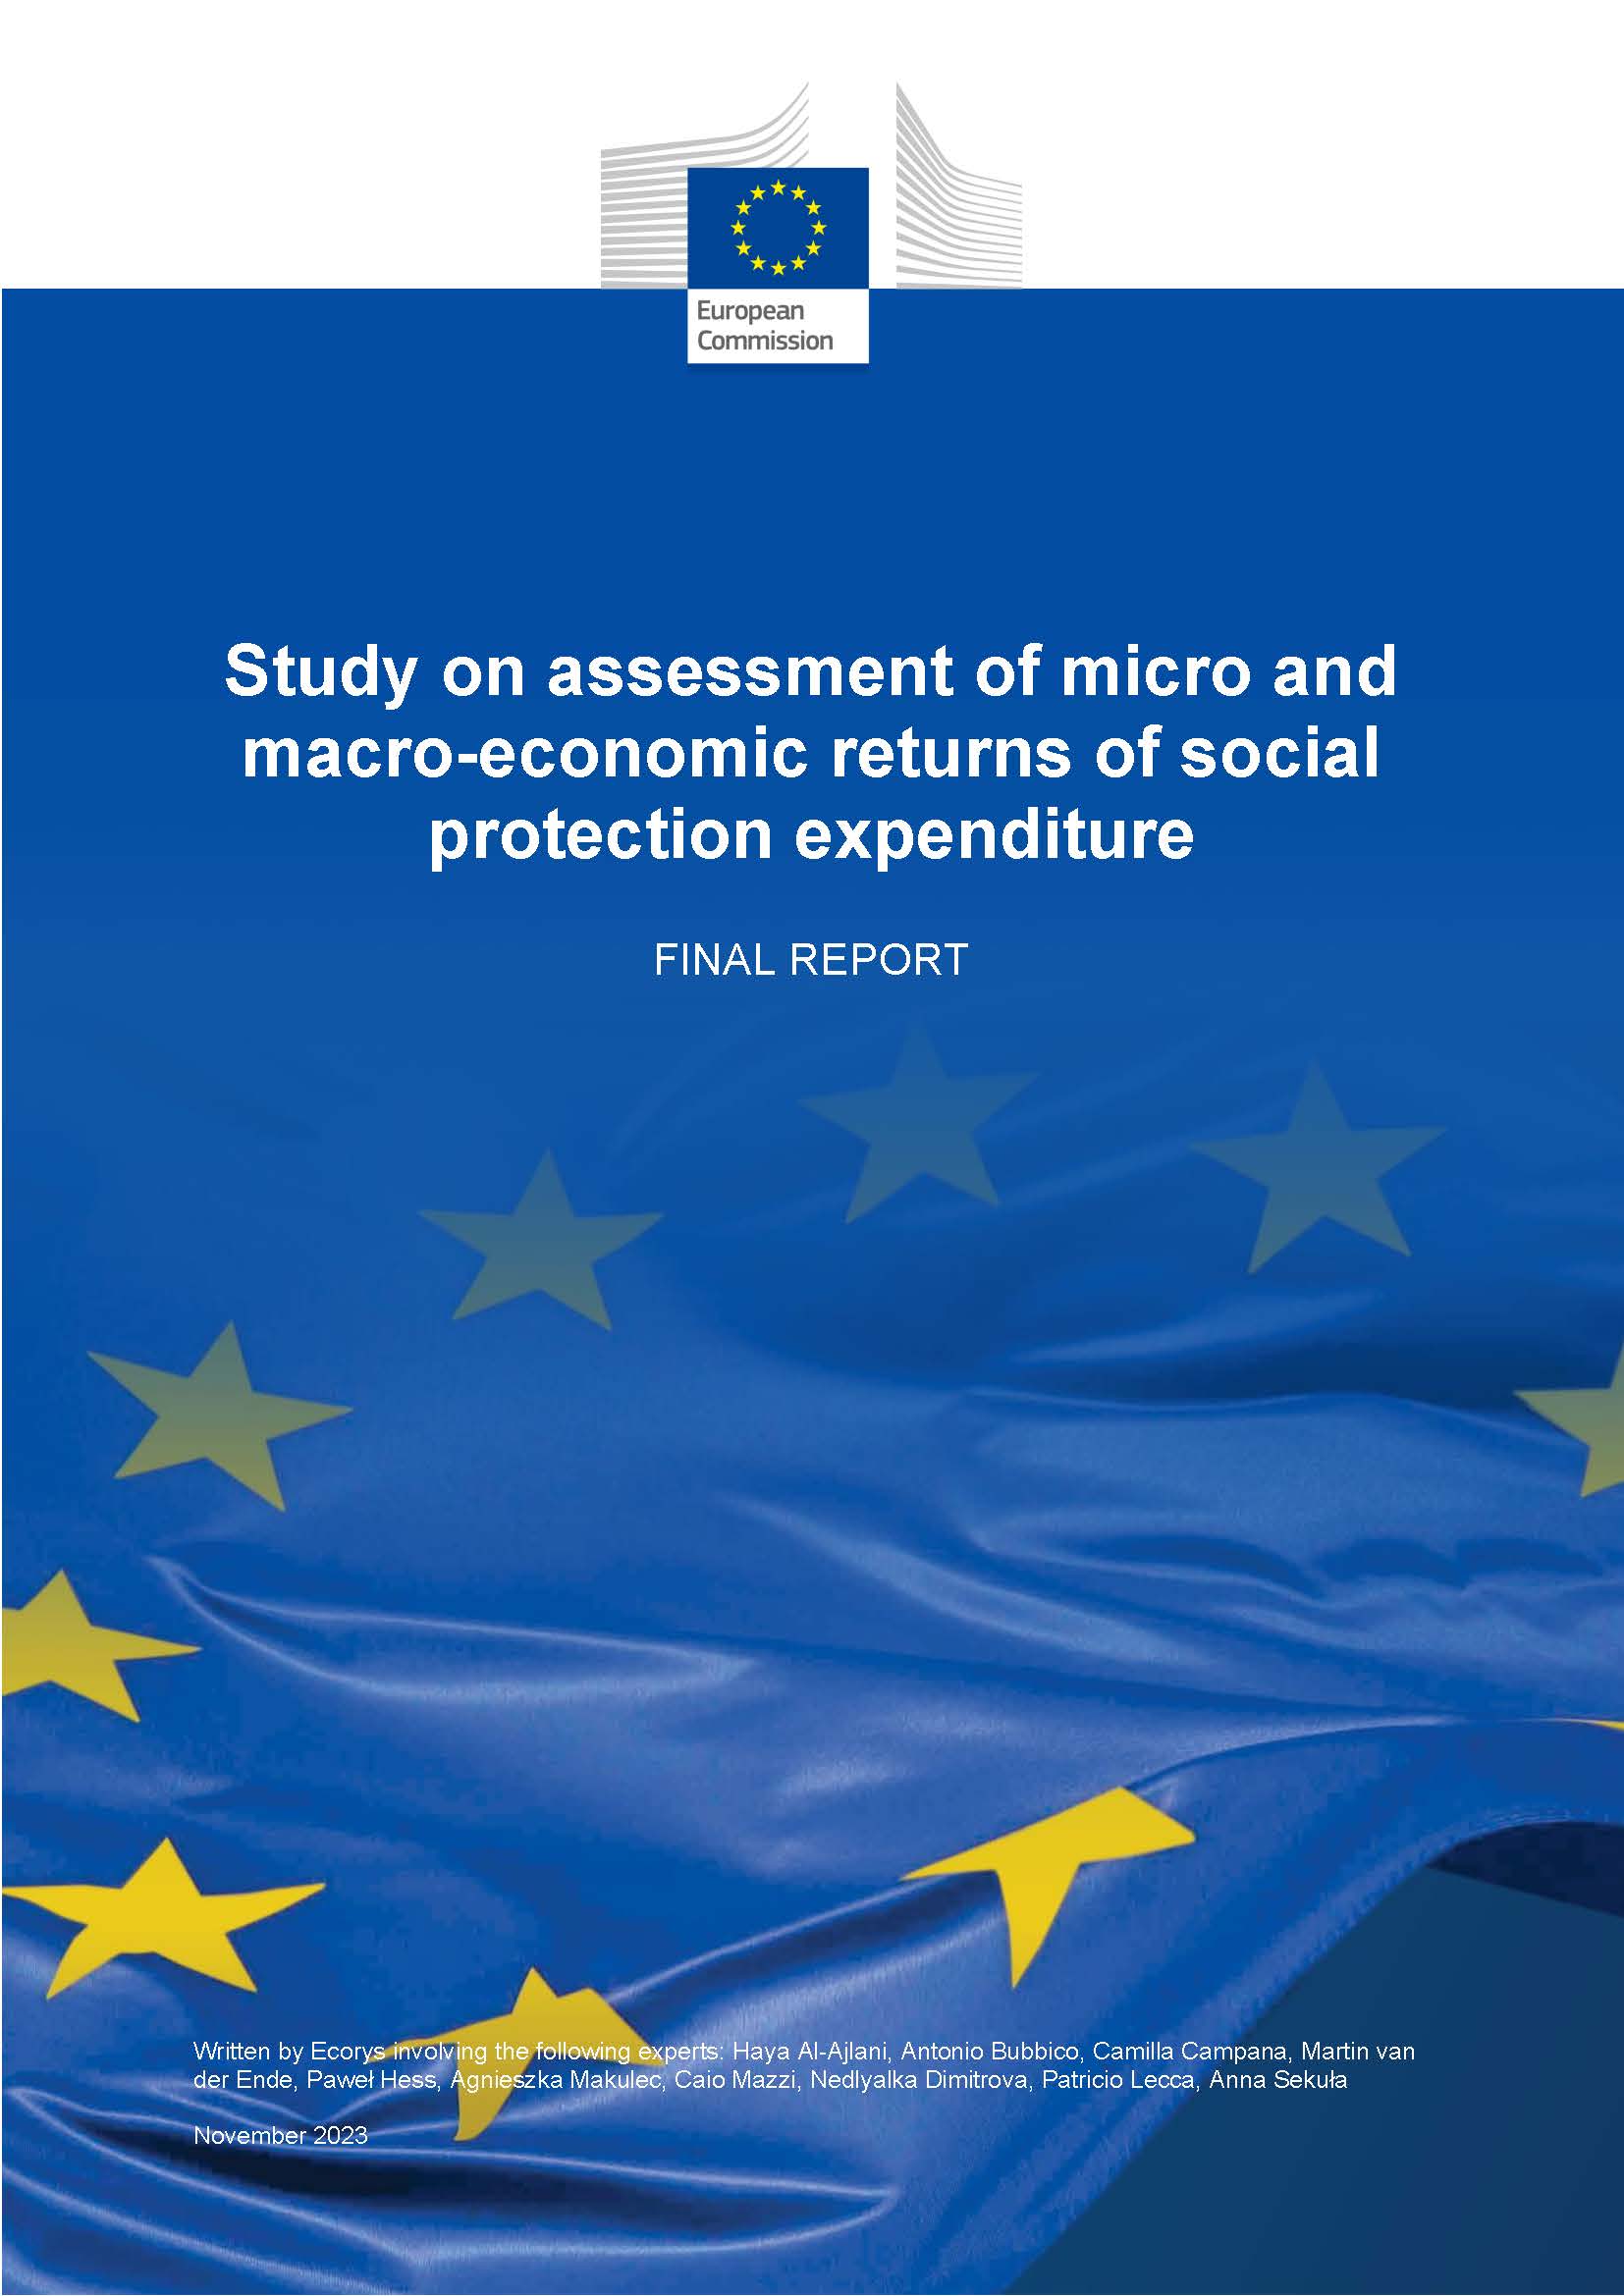 Study on assessment of micro and macro-economic returns of social protection expenditure